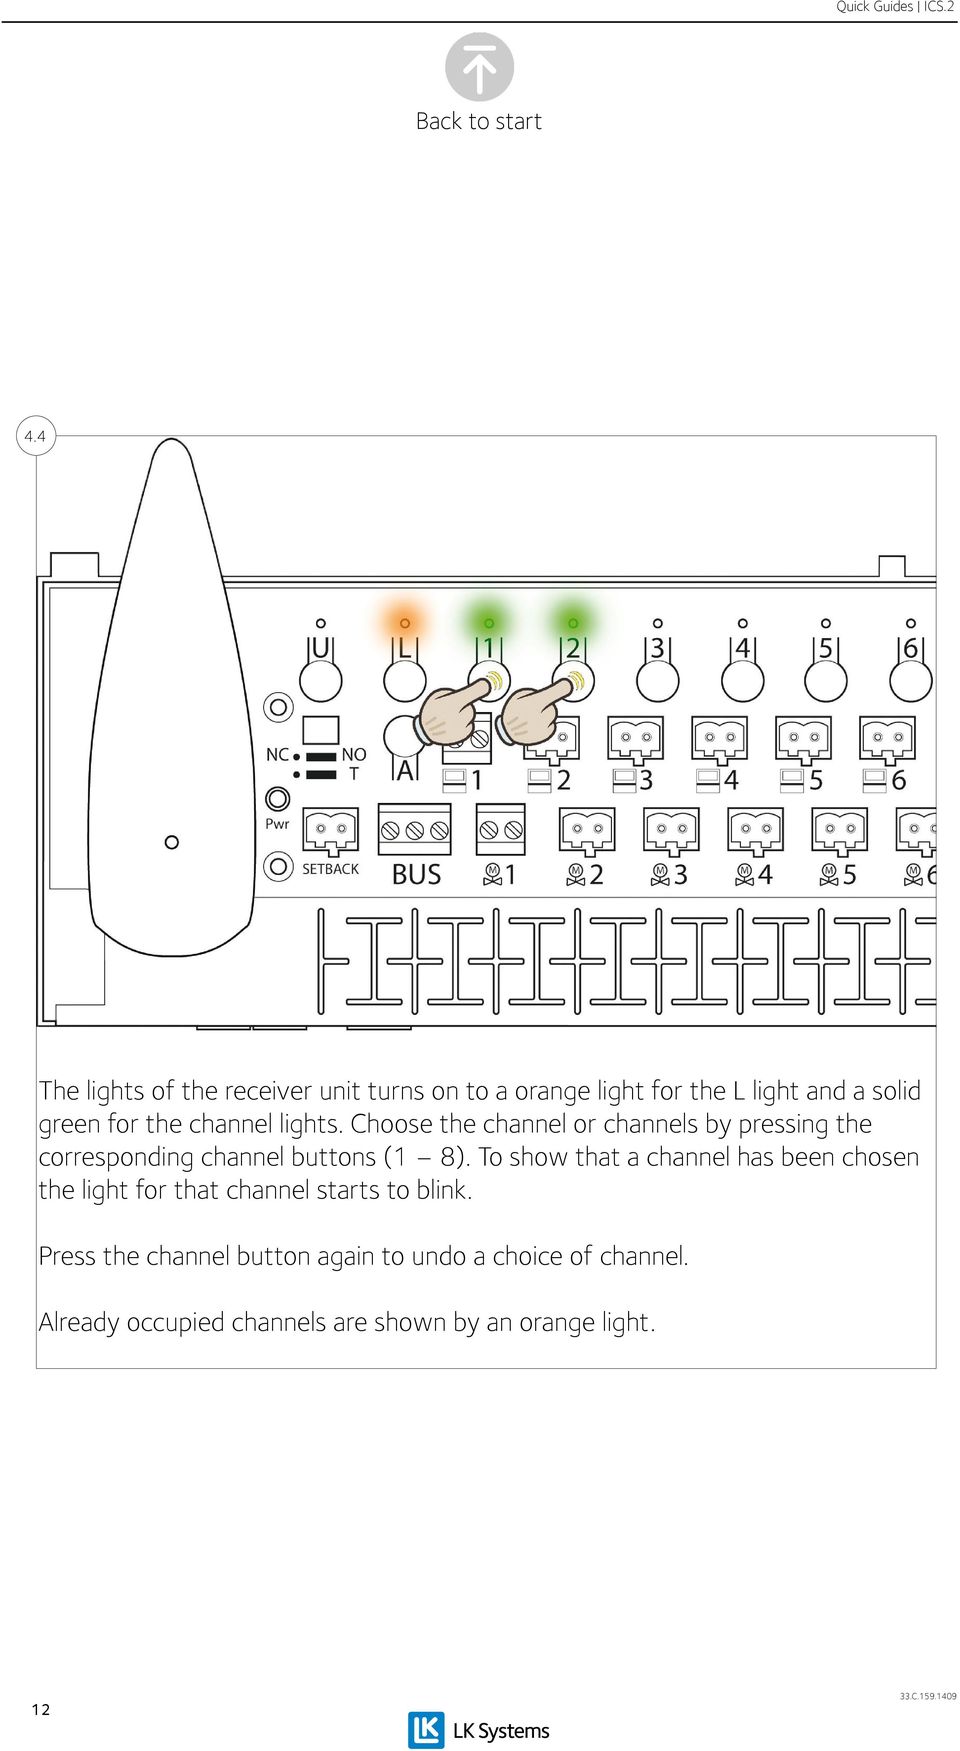 channel lights. Choose the channel or channels by pressing the corresponding channel buttons (1 8).